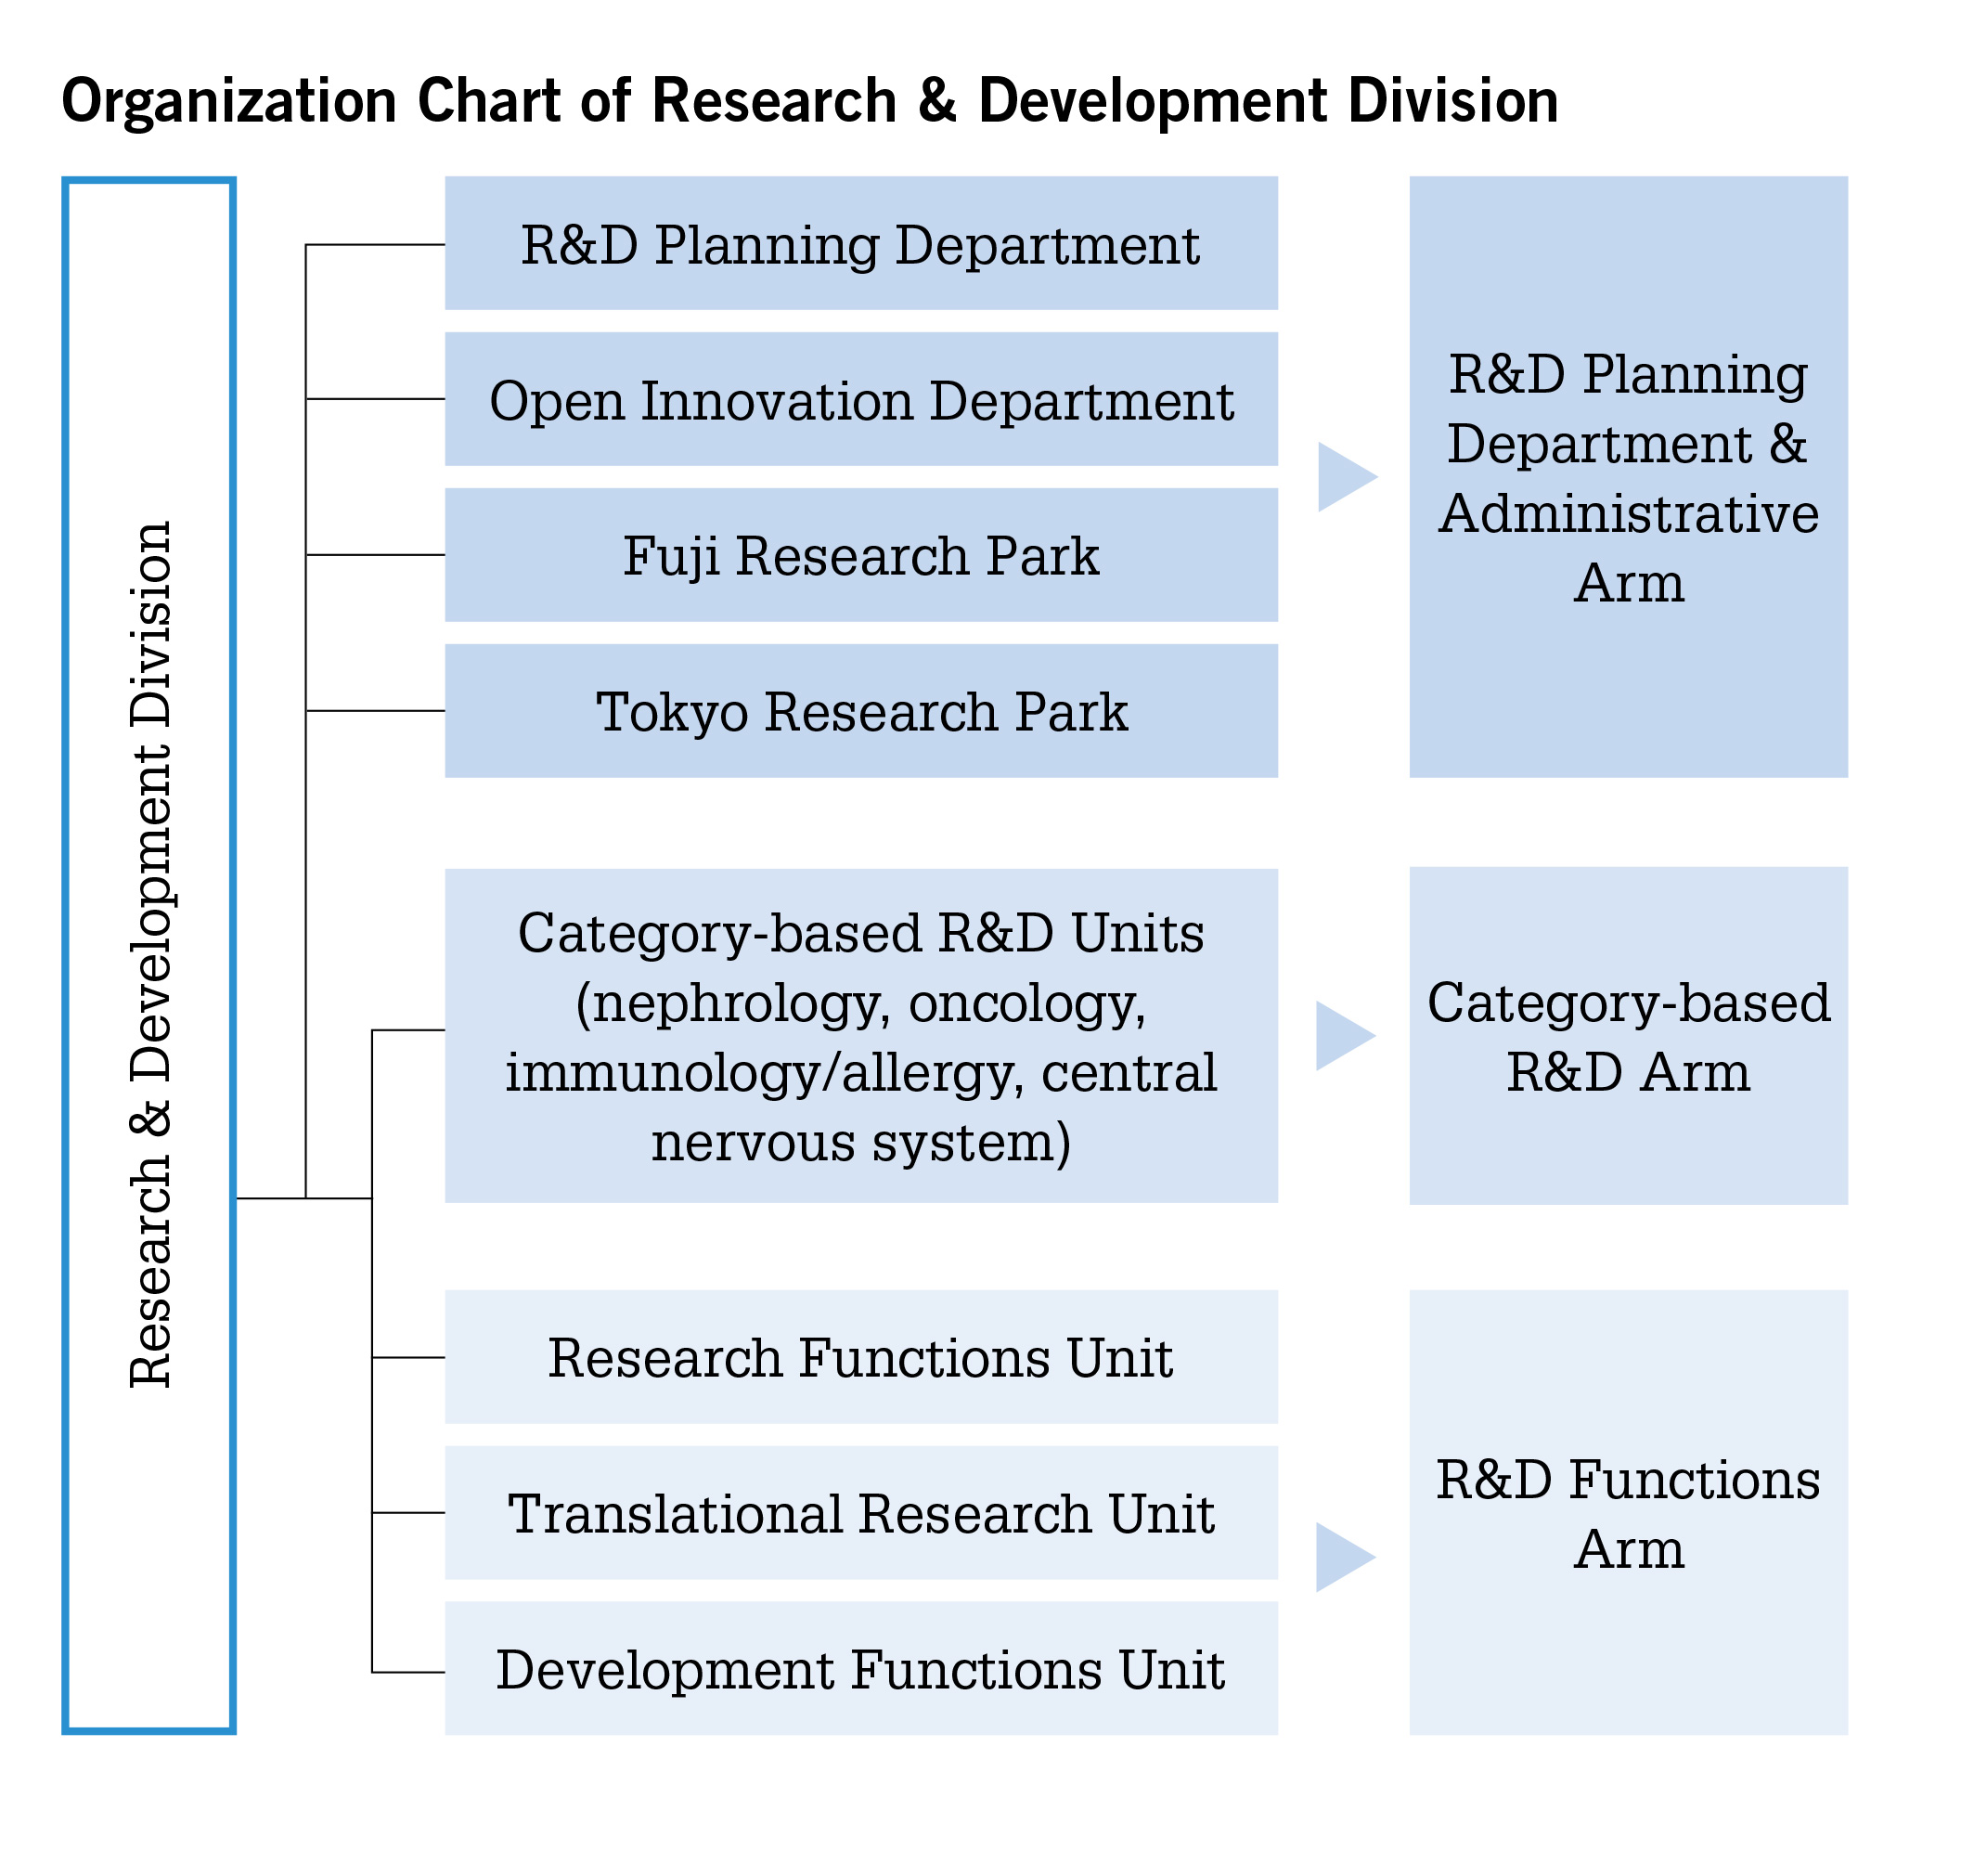 Organization Chart of Research & Development Division Image